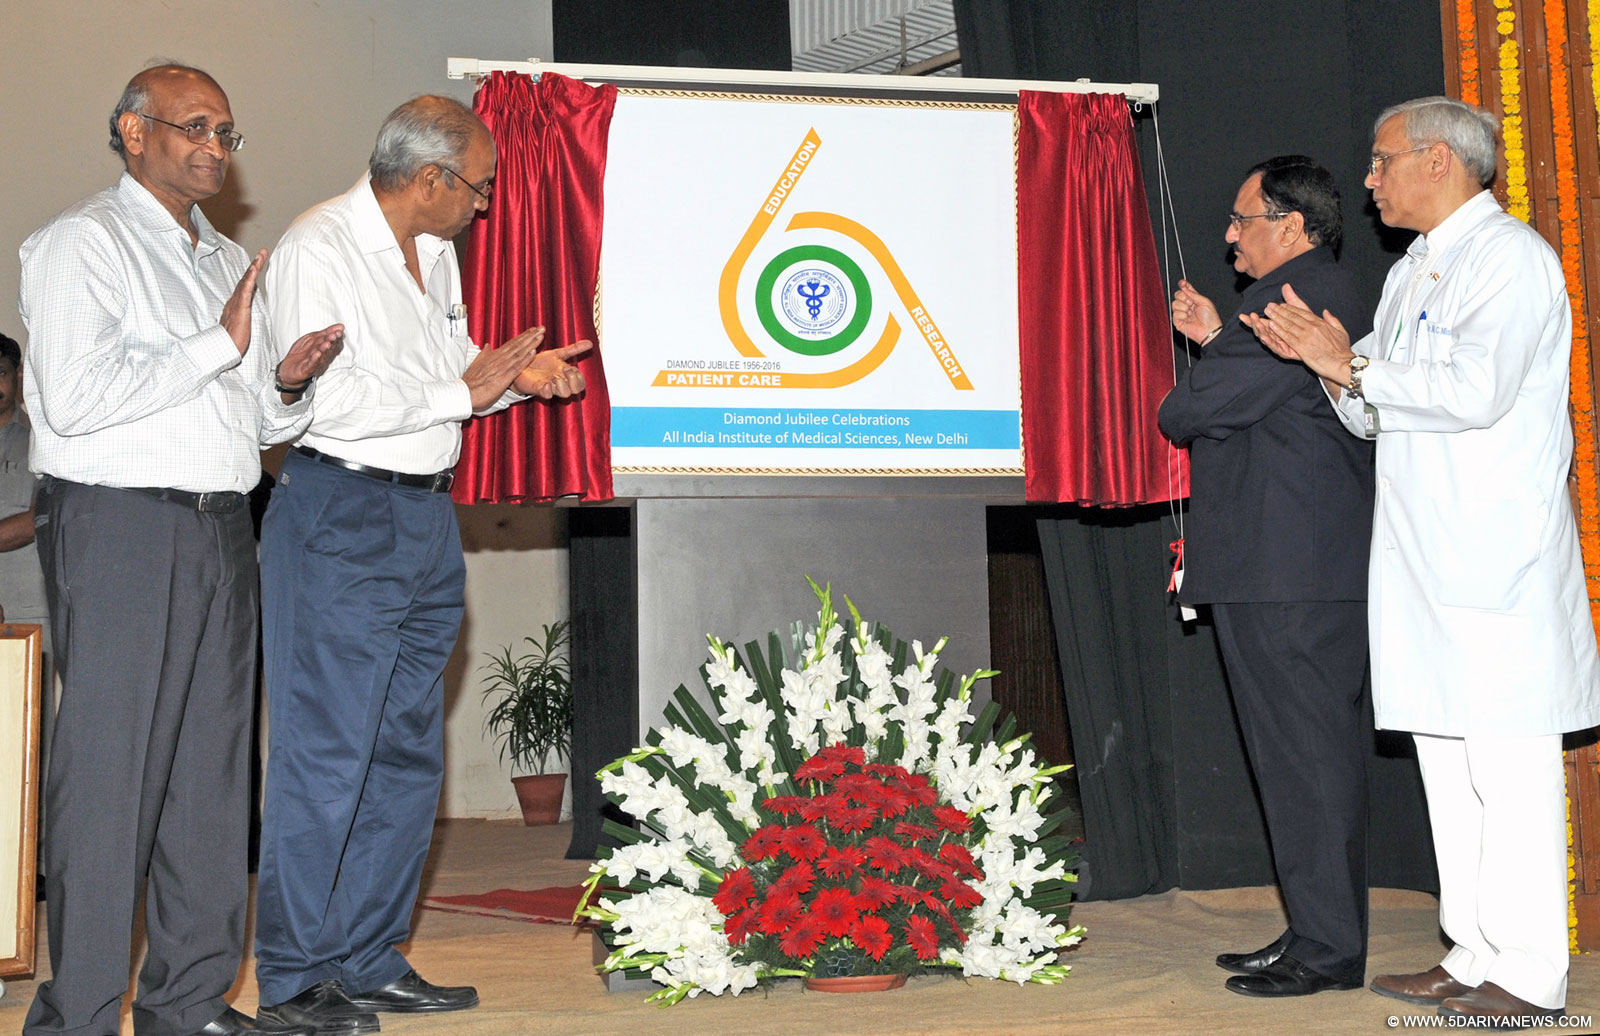 The Union Minister for Health & Family Welfare, Shri J.P. Nadda launching the Diamond Jubilee Celebrations, on the occasion of 60th Institute Day of AIIMS, in New Delhi on September 24, 2015. The Director, AIIMS, New Delhi, Prof. M.C. Mishra is also seen.